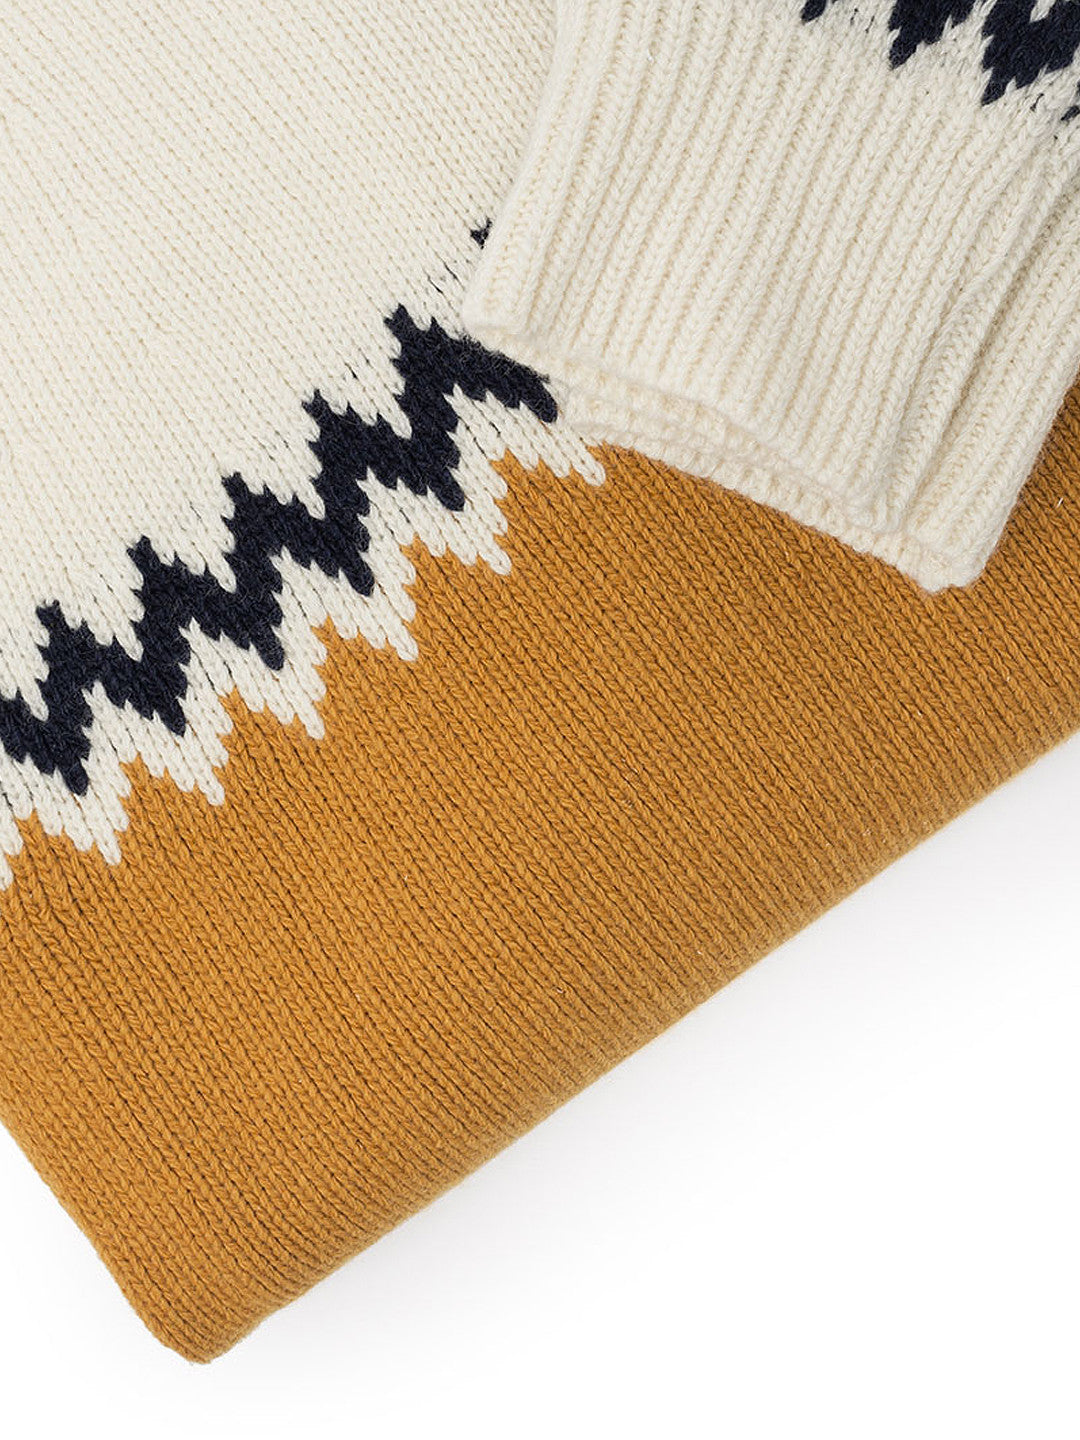 Eco-fashion long-sleeve knit from two thirds in camel